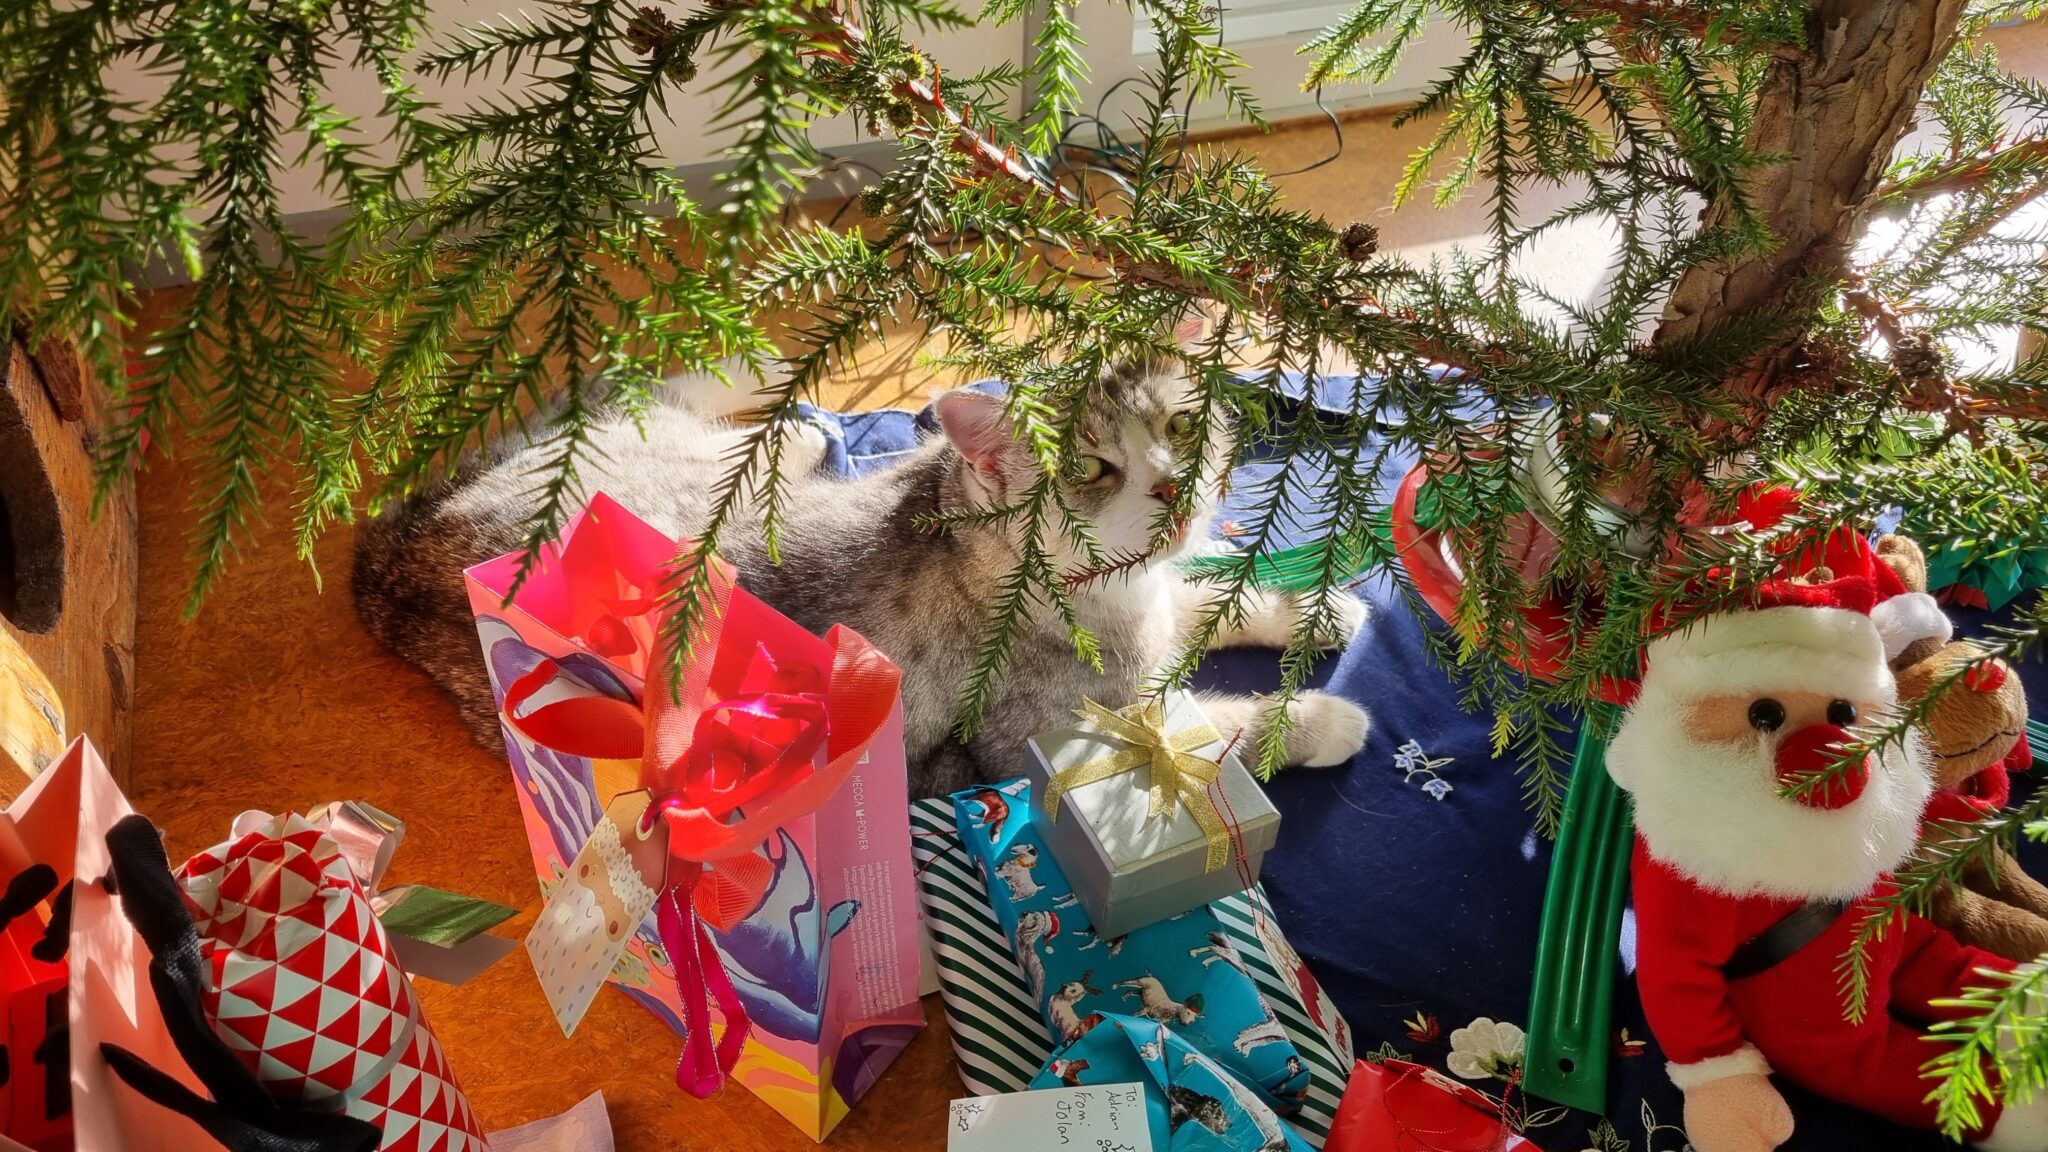 Base of chsritmas tree with presents and cat hiding behind branches